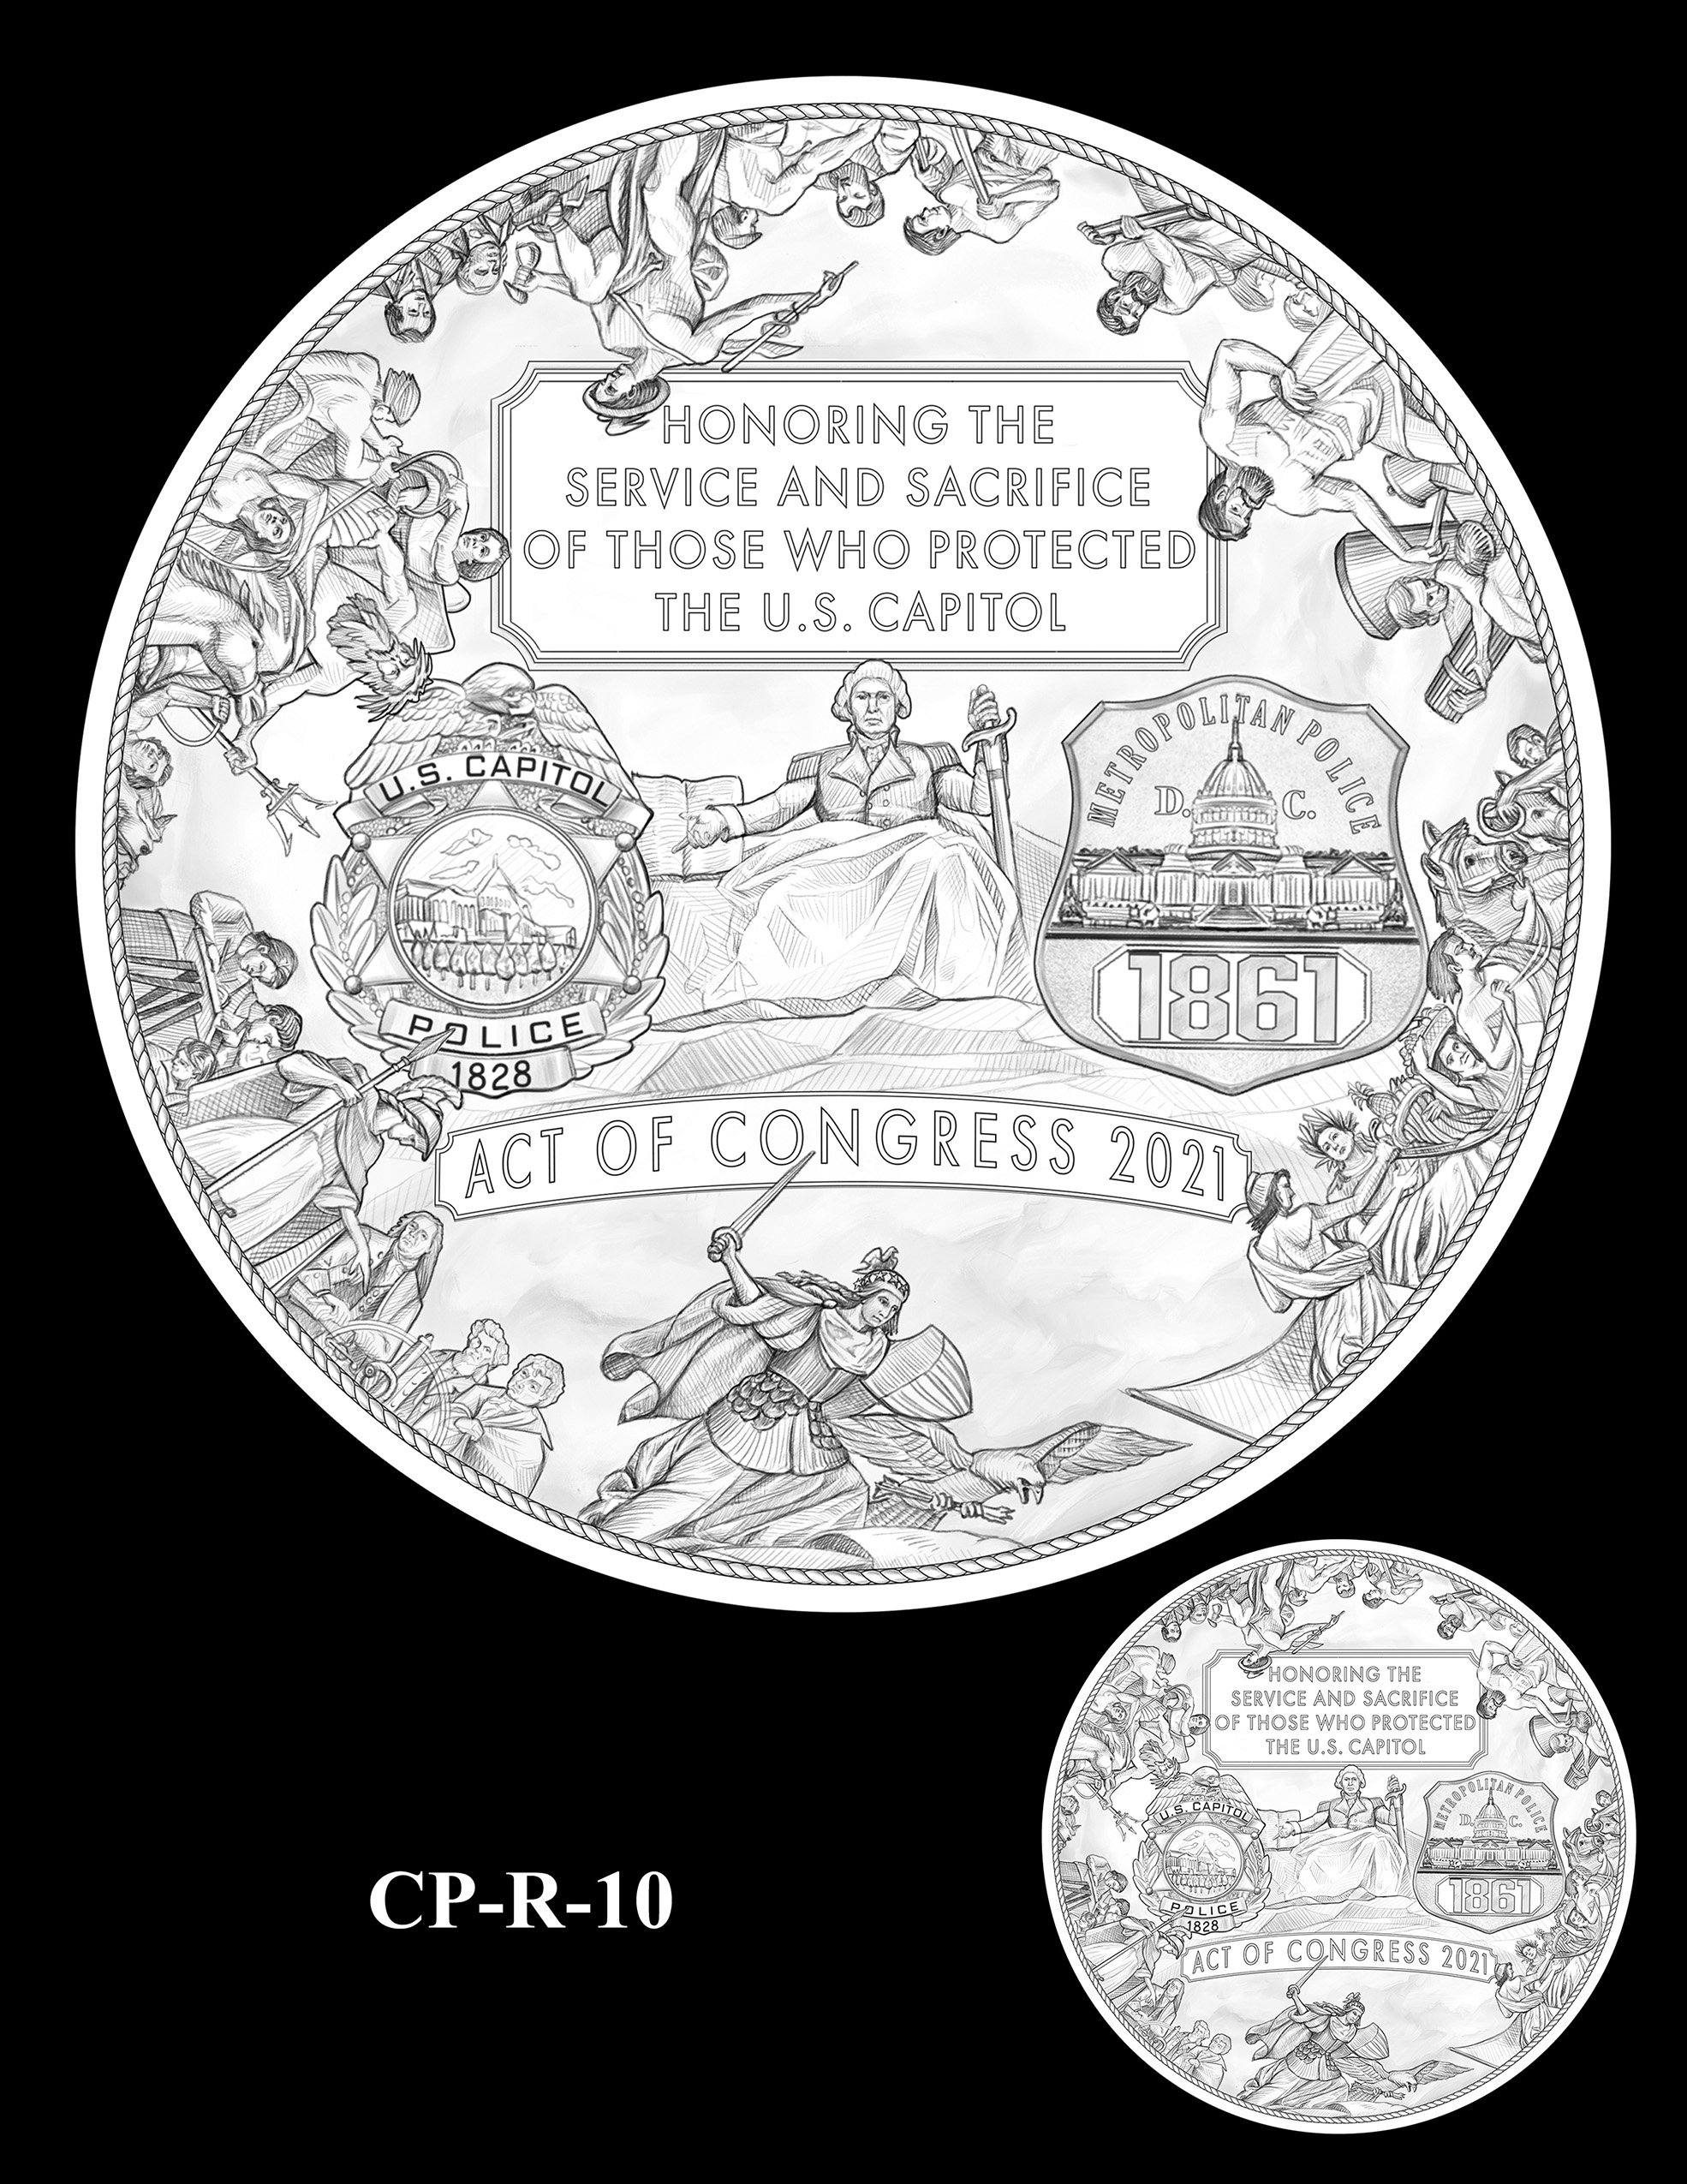 CP-R-10 -- Congressional Gold Medal for Those Who Protected the U.S. Capitol on January 6th 2021